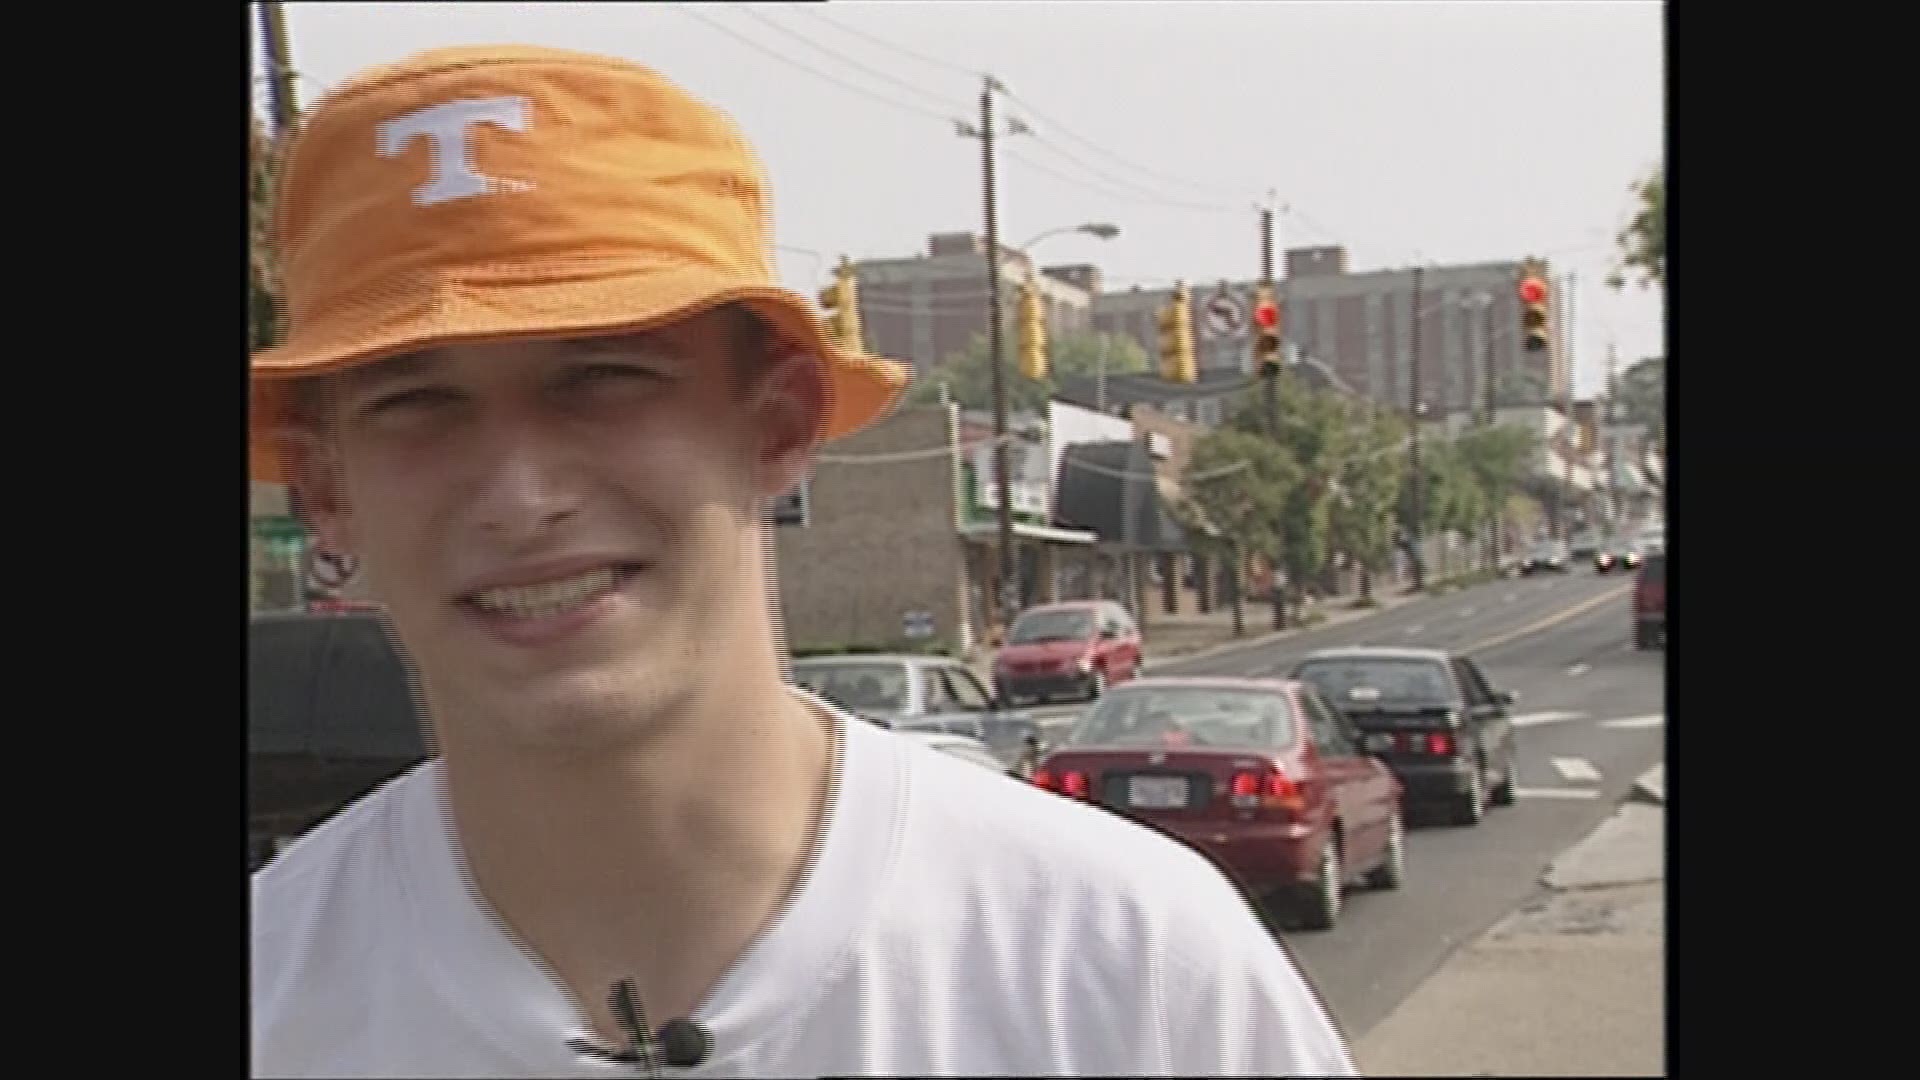 There was a lot of cleanup to be done after the Vols beat the Gators for the first time in six years on Sept. 19, 1998.